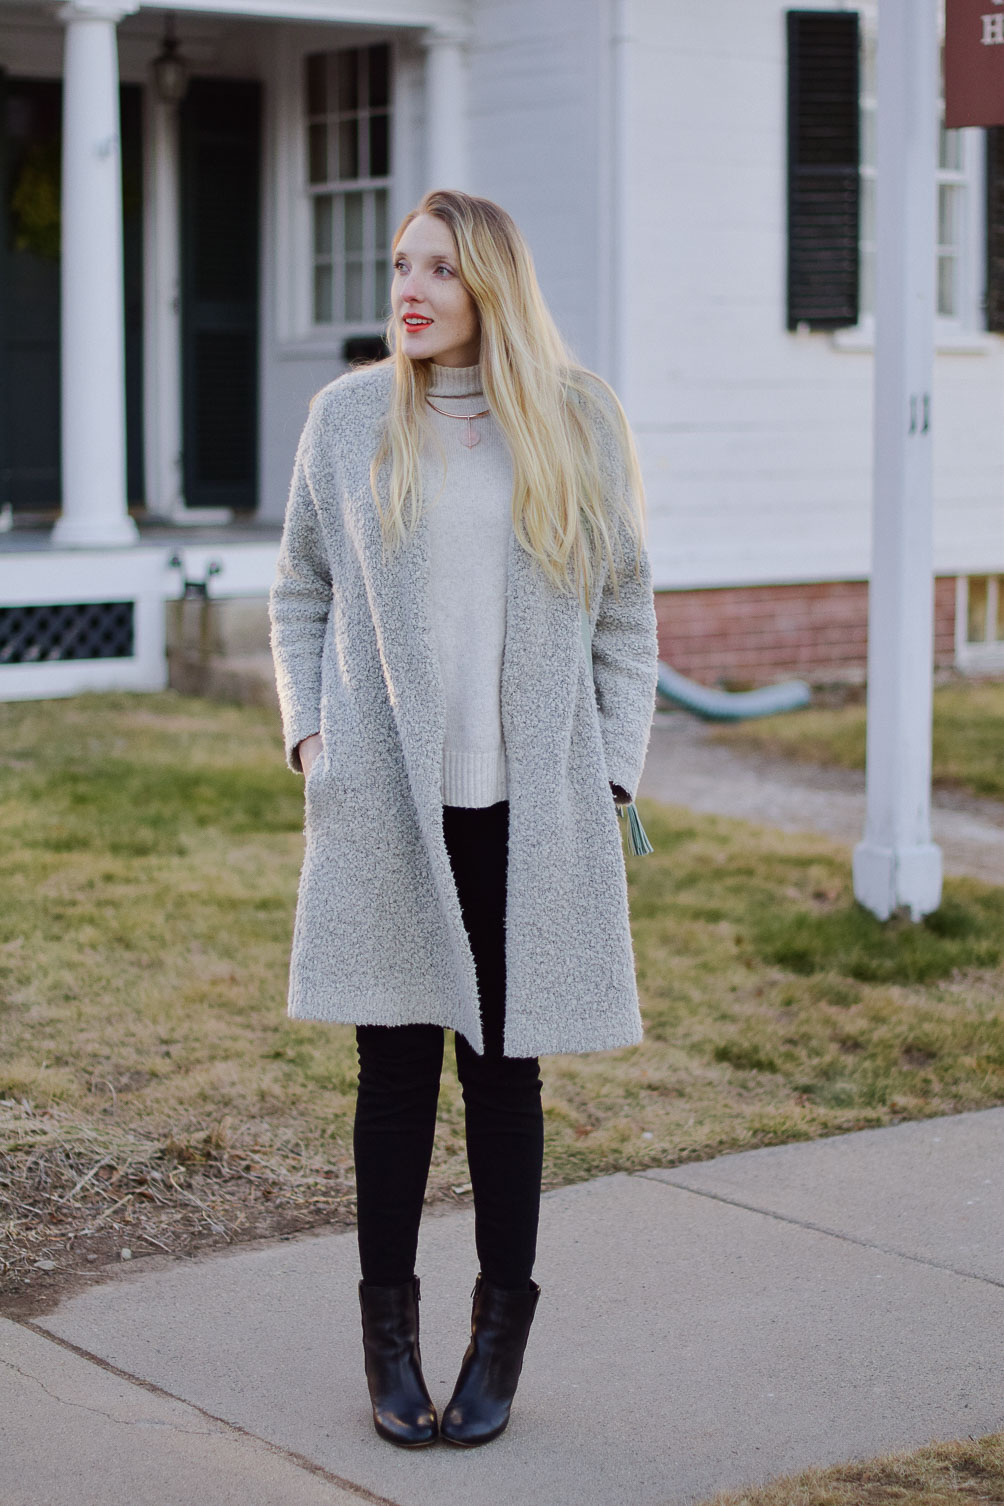 styling a coatigan layered over black skinny jeans and turtleneck sweater with black leather booties